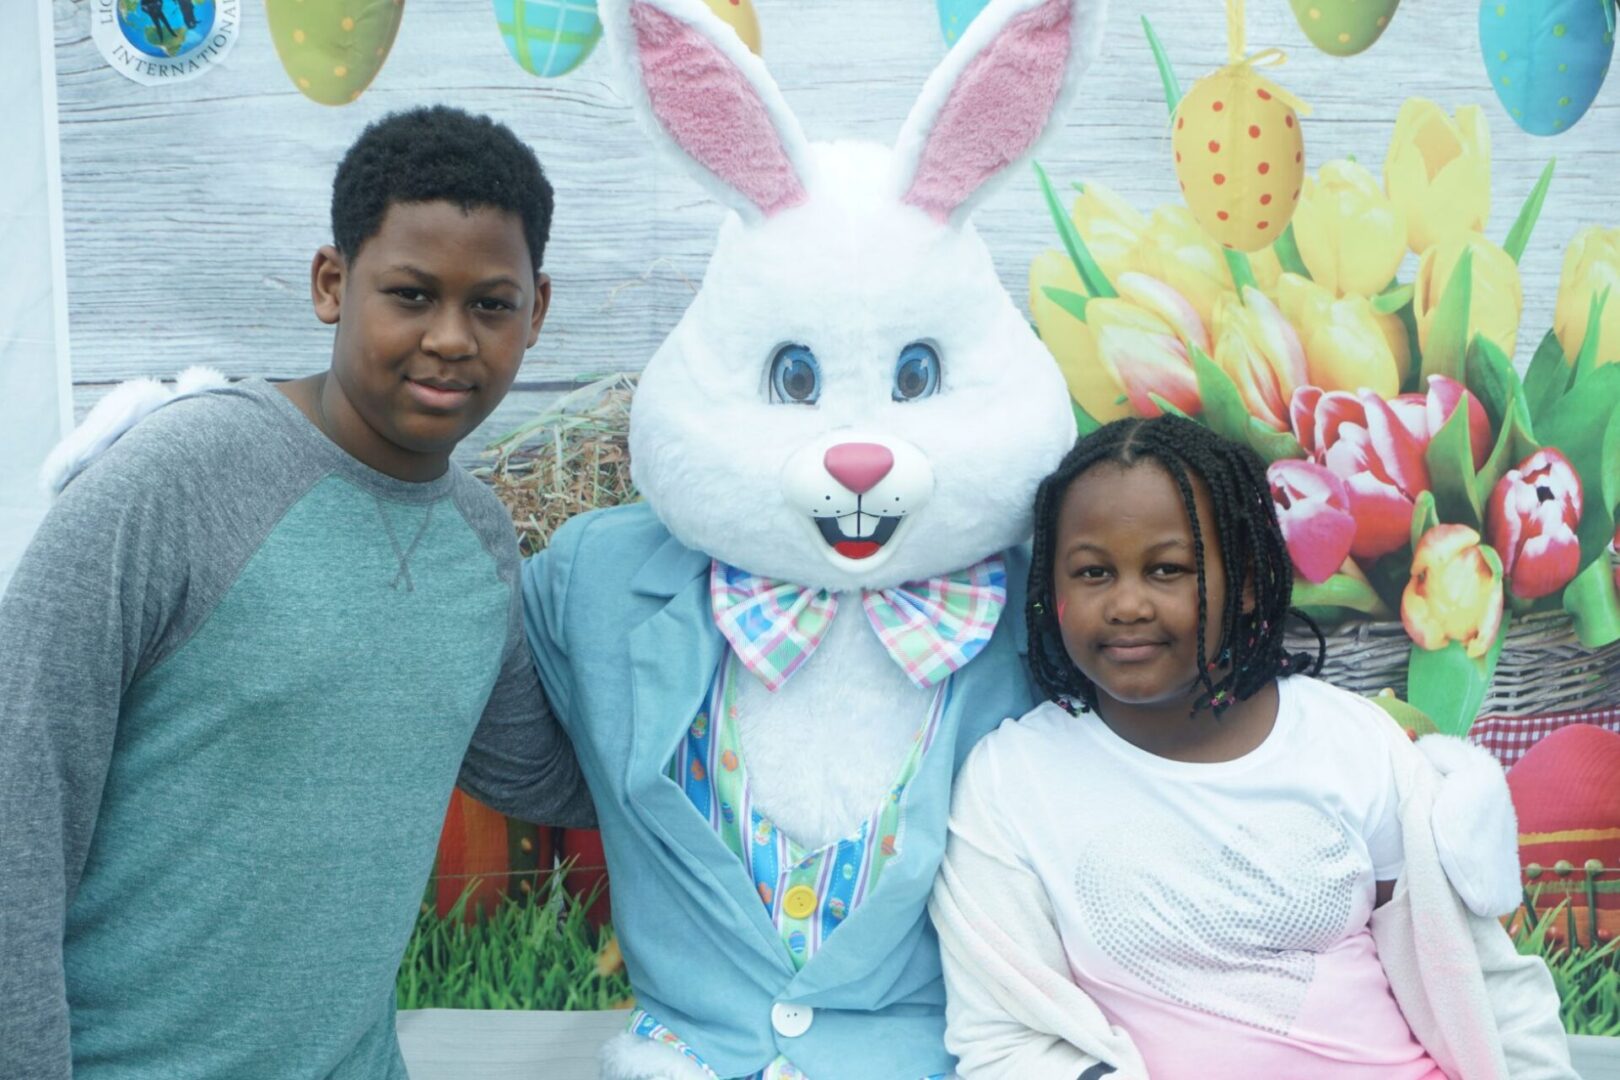 The bunny mascot together with a boy and a girl wearing blue and pink clothes, respectively (2)